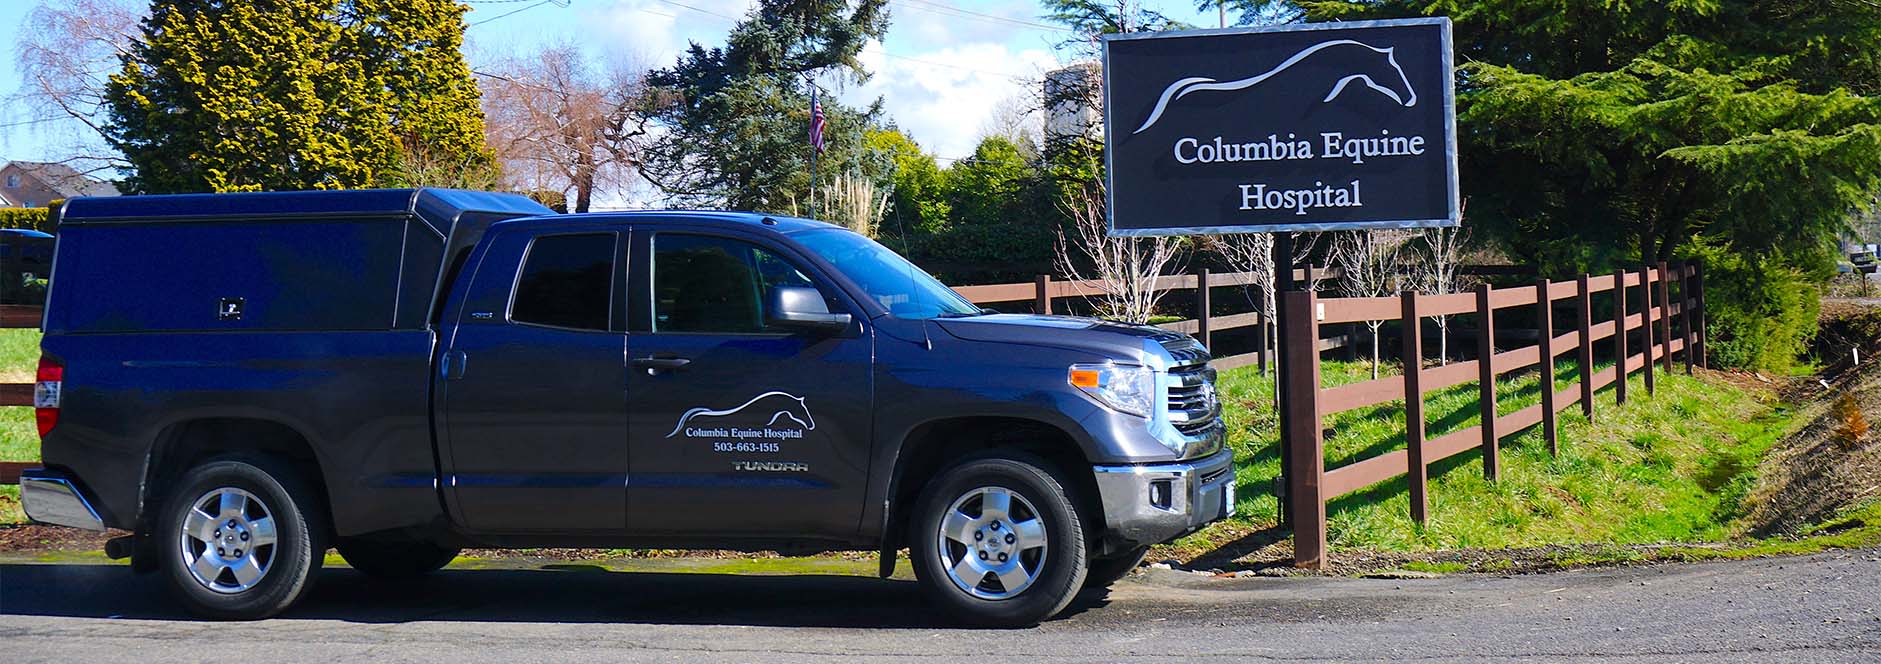 Columbia Equine Truck & Sign